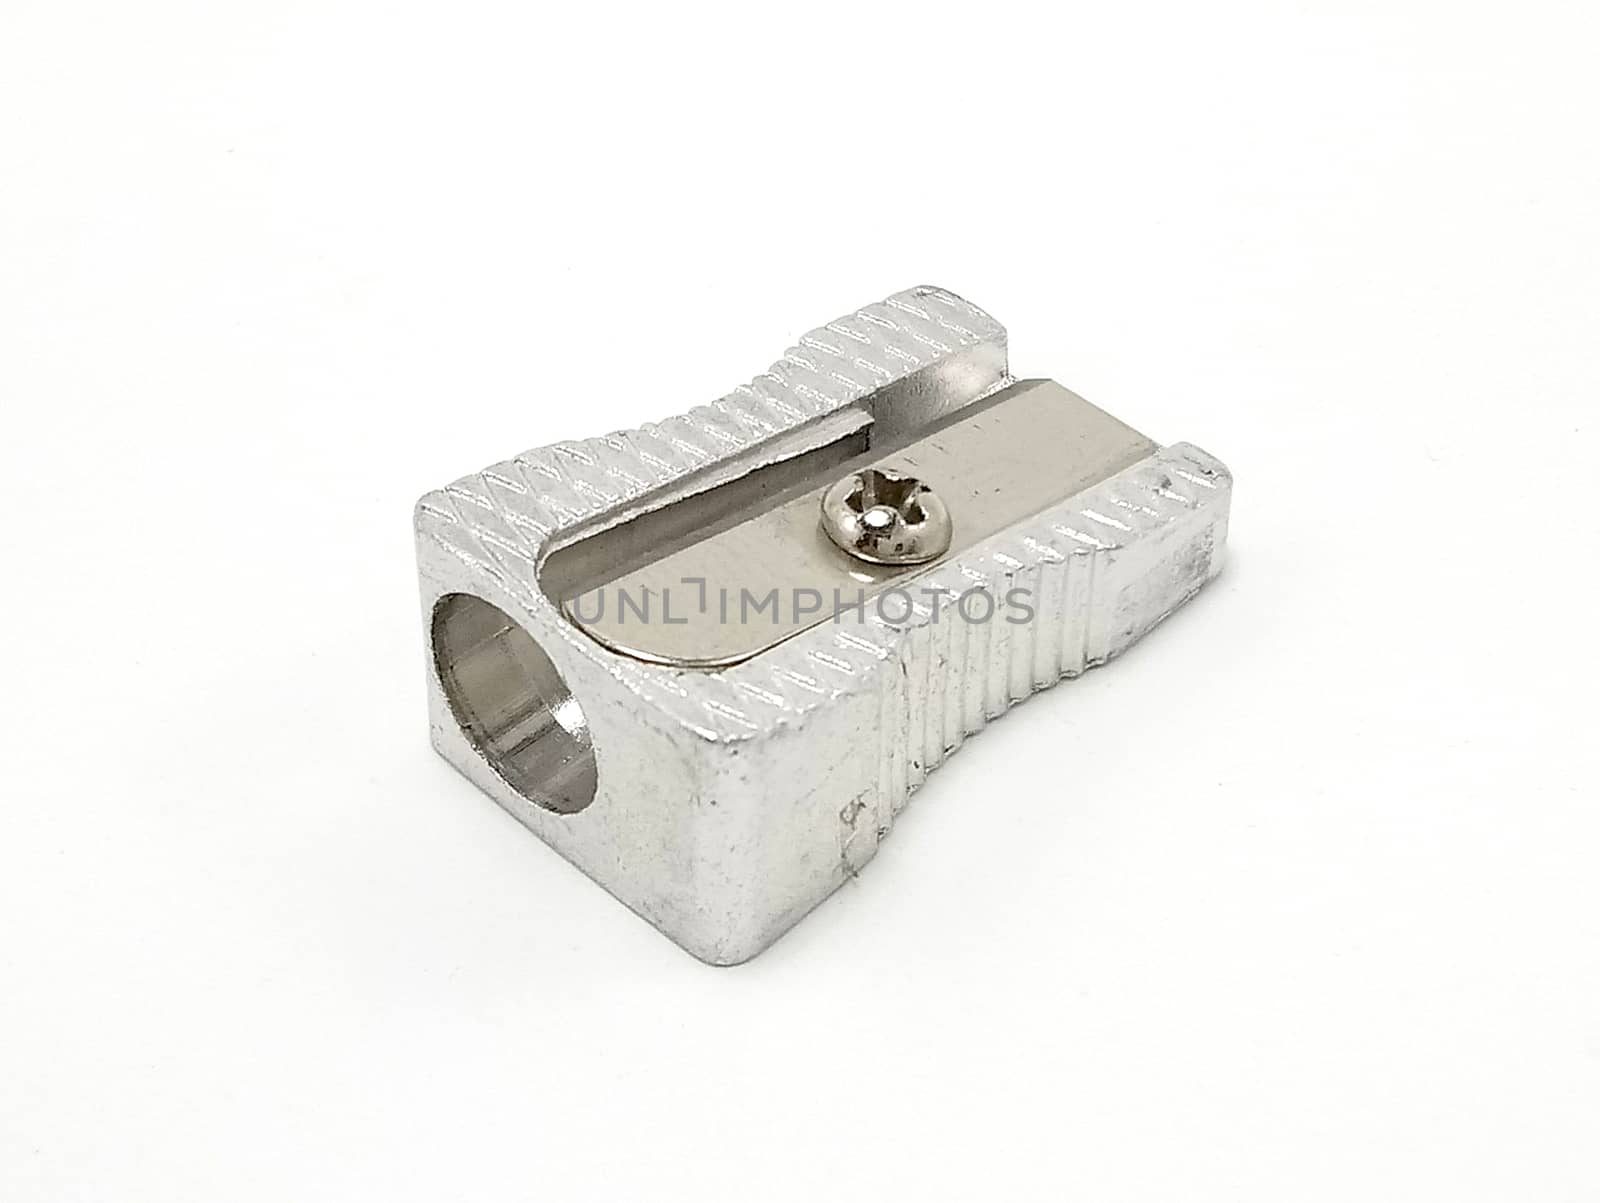 Silver color one slot pencil sharpener by imwaltersy